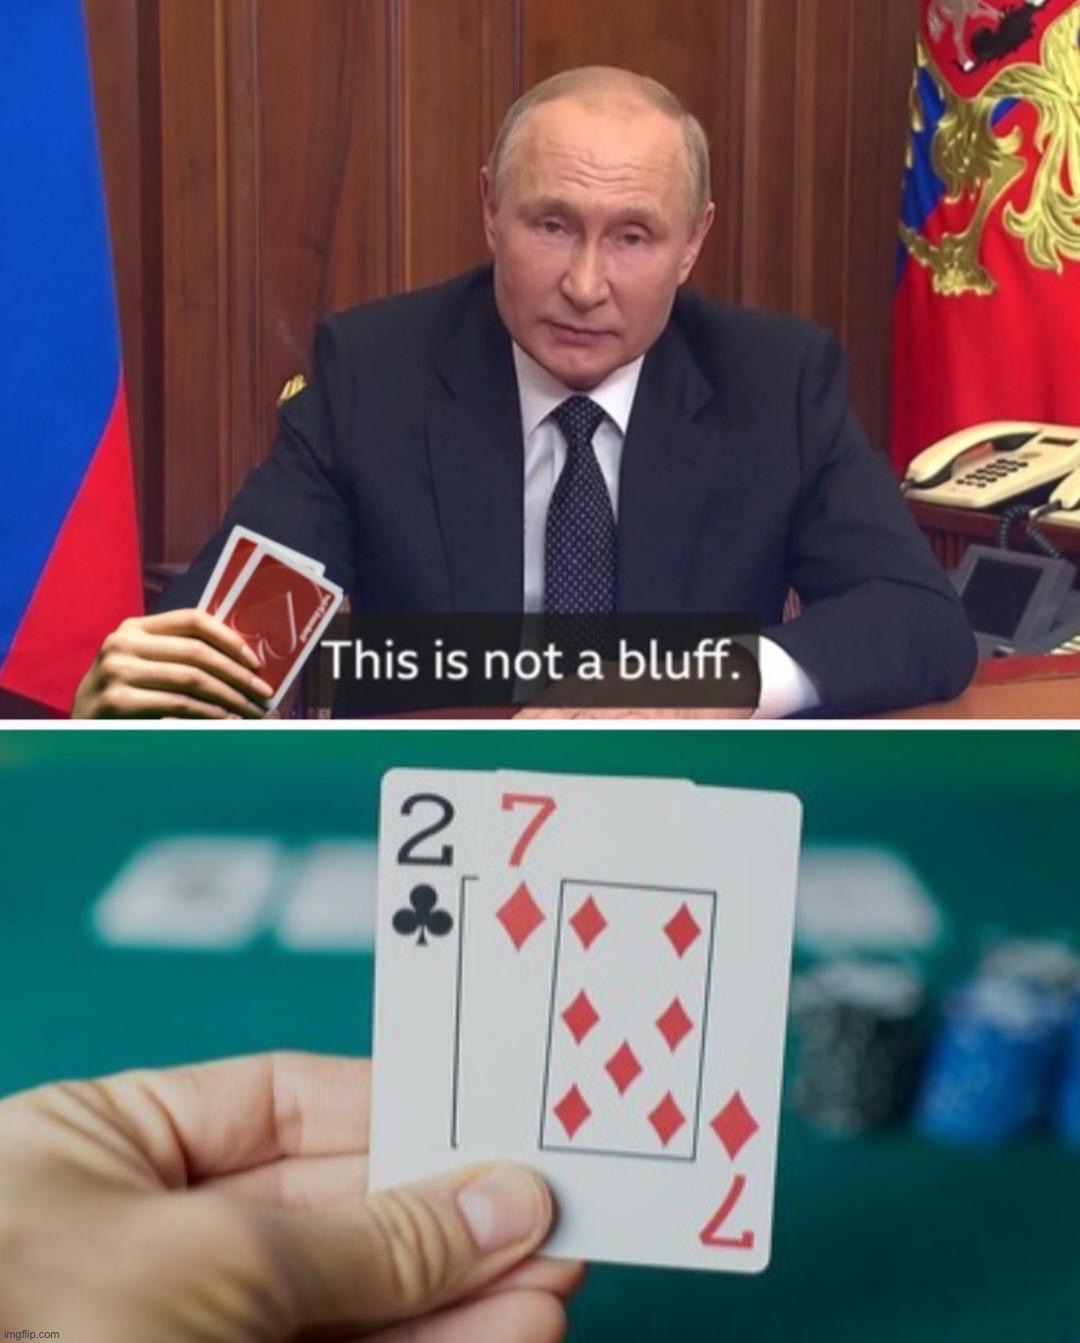 Russian Hold ‘Em | image tagged in putin this is not a bluff,putin,vladimir putin,not a bluff,2 7,russian hold em | made w/ Imgflip meme maker